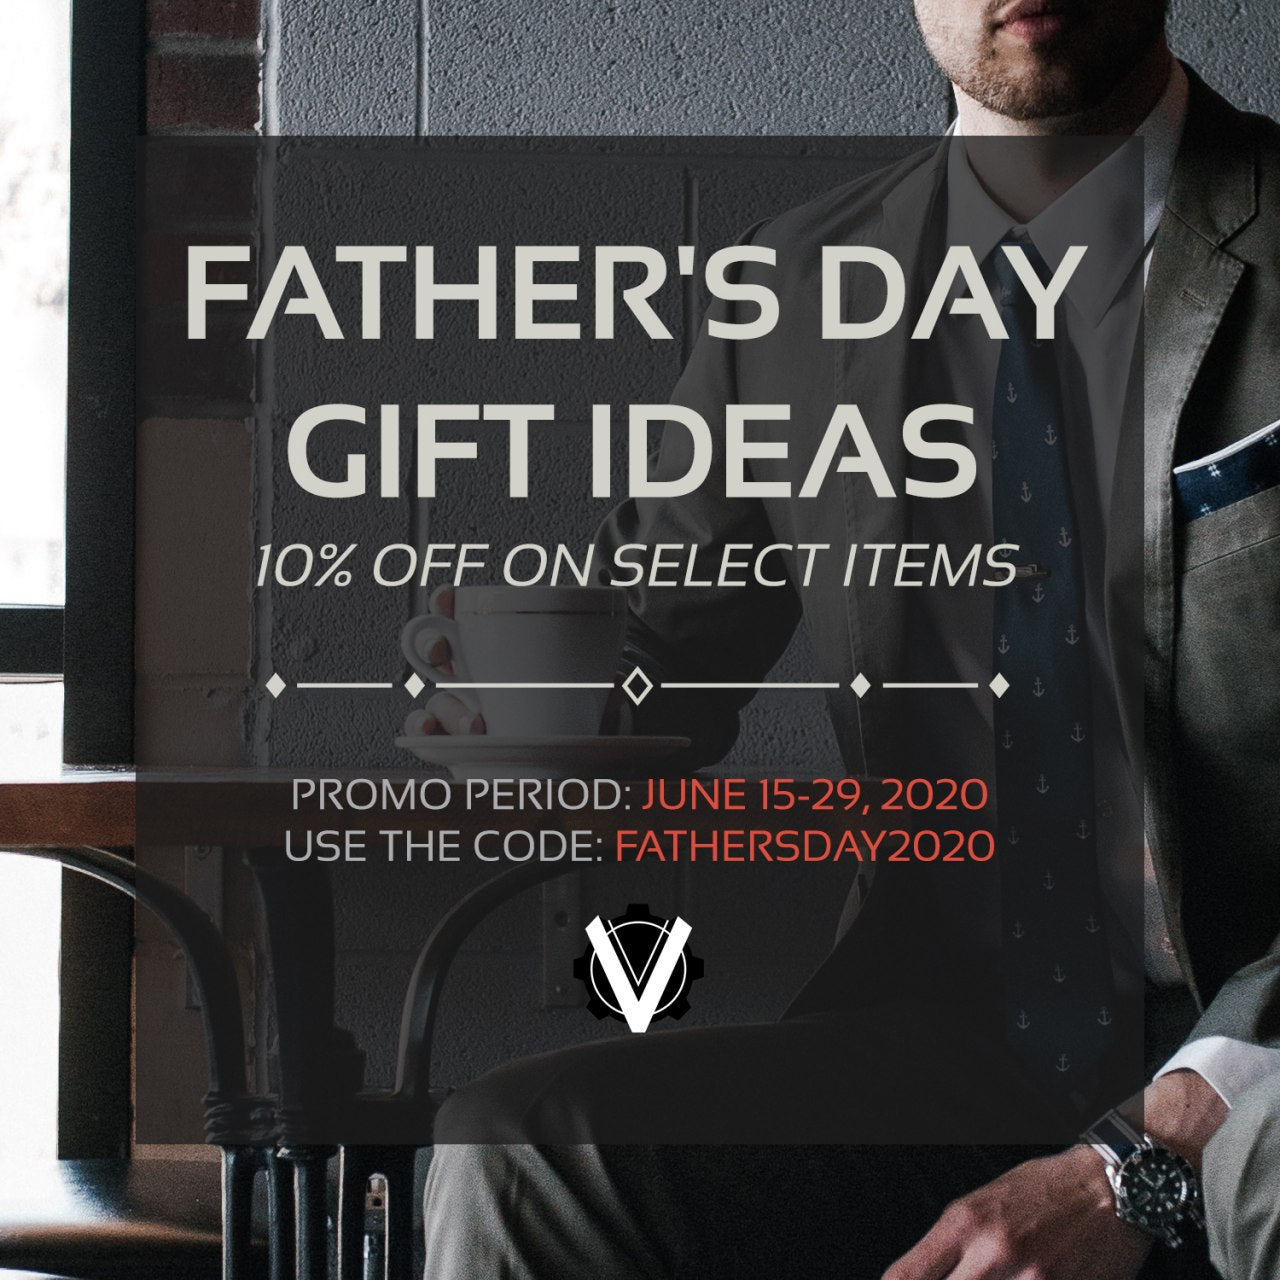 Enjoy 10% off from this special Father's day Selection. Use promo code "Fathersday2020" upon check out.